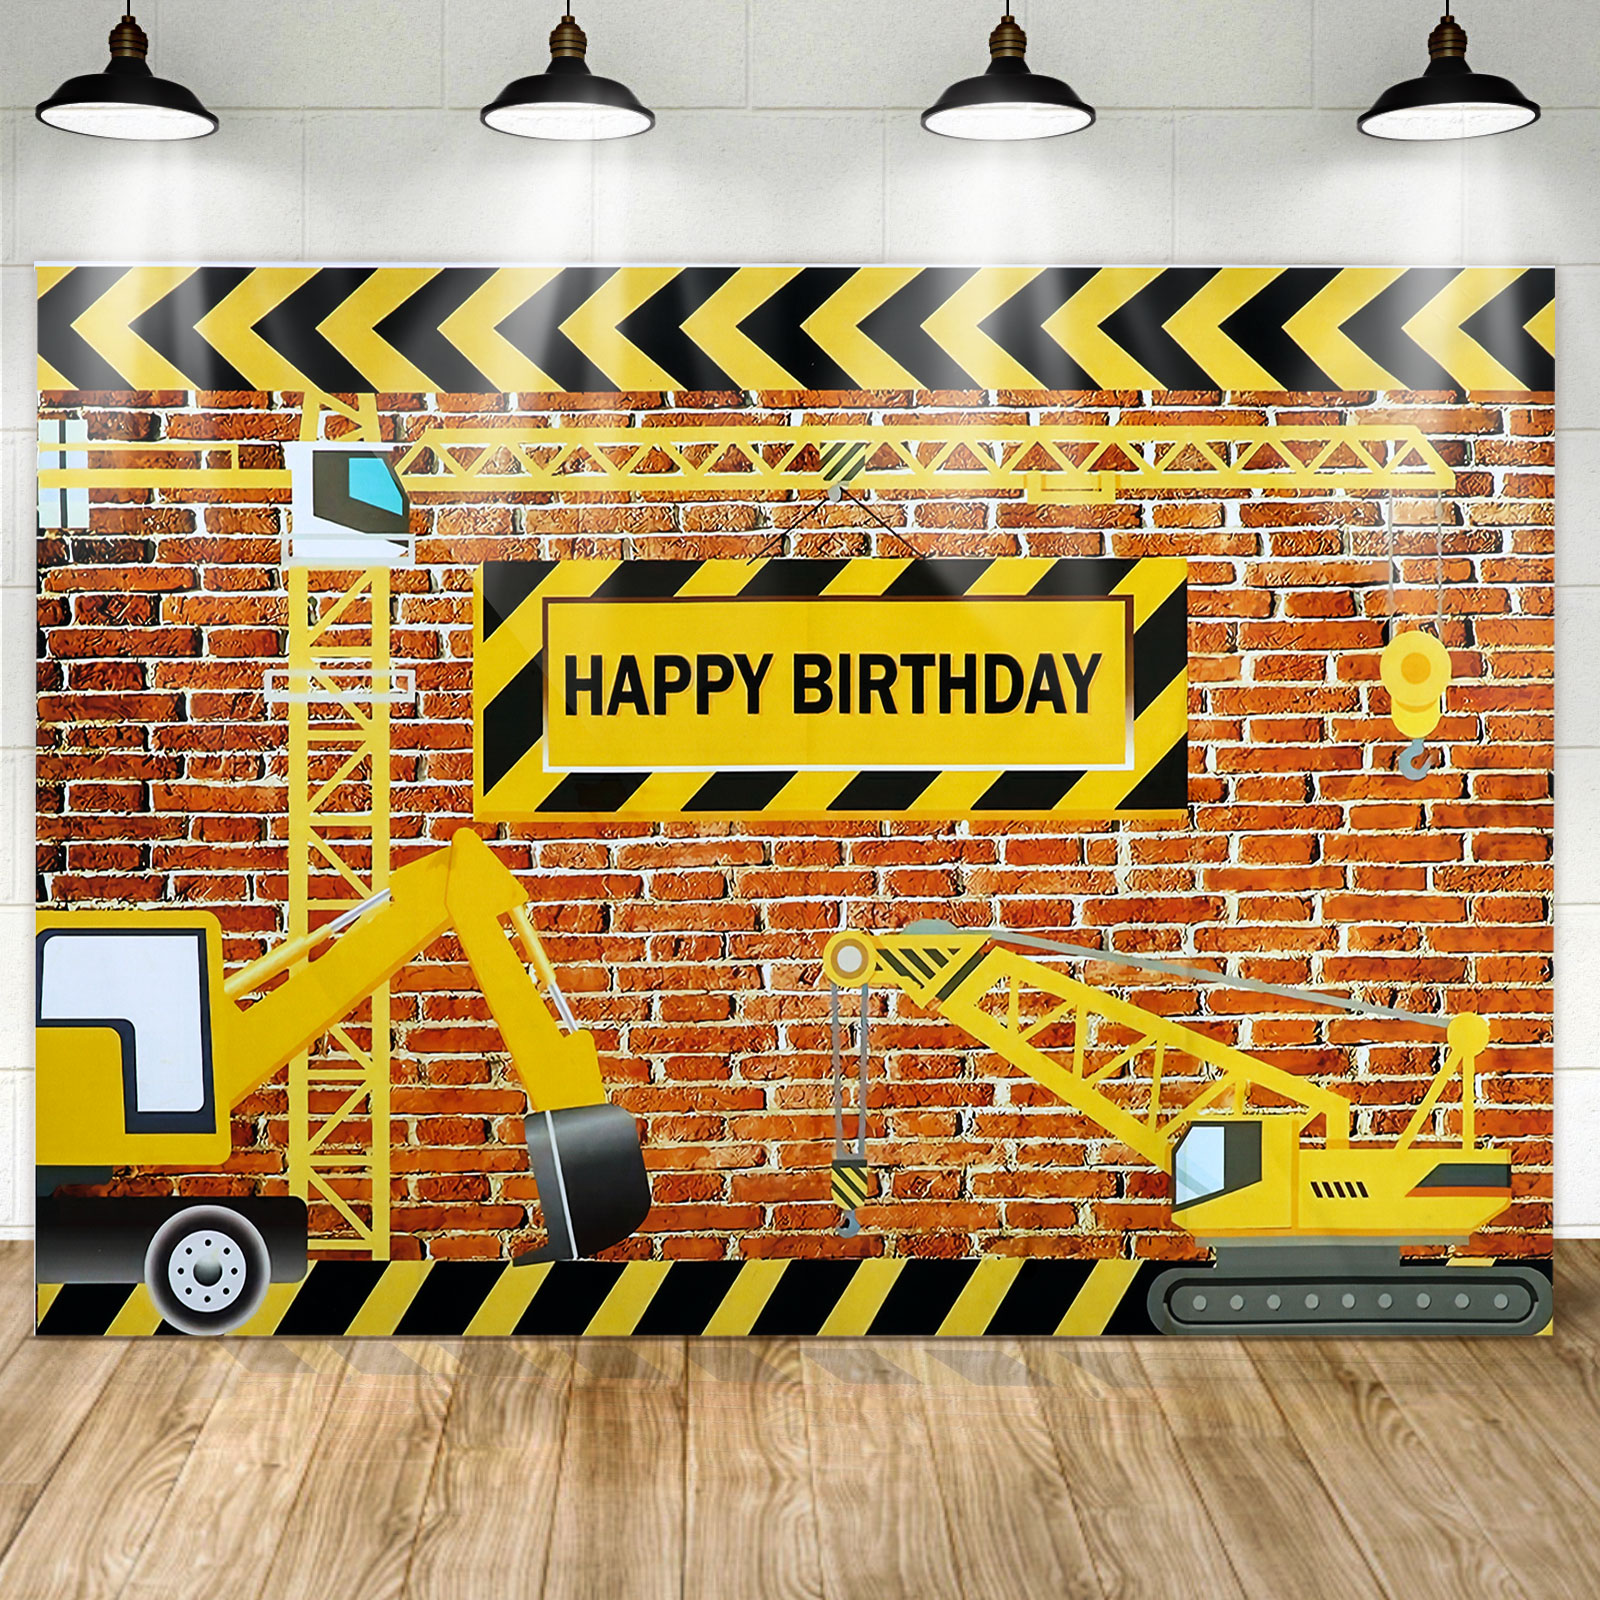 15-x-09m-Boy-Party-Banner-Backdrop-Decorations-Kids-Birthday-Decor-Photography-Background-1937988-4